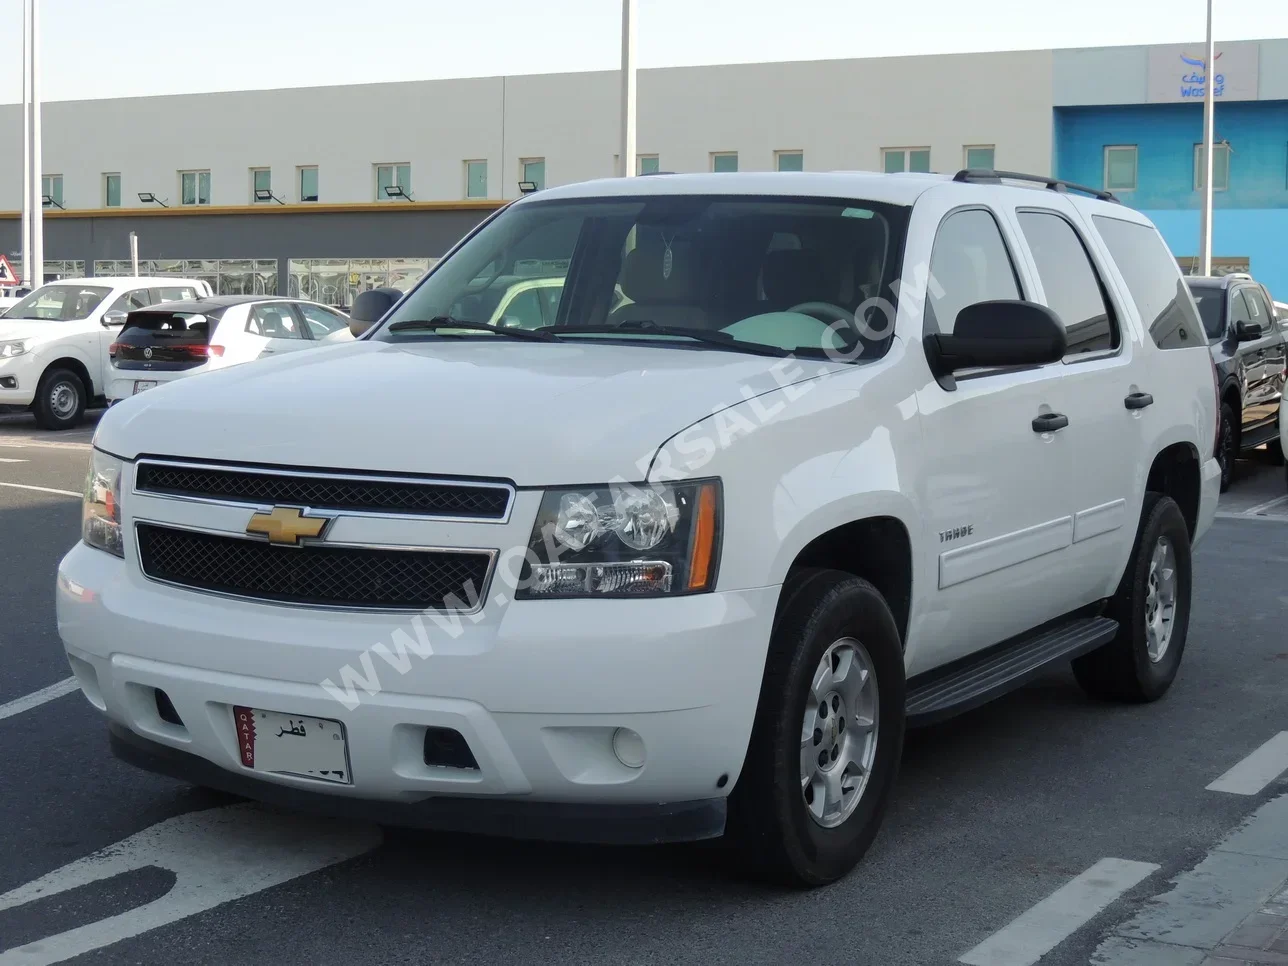  Chevrolet  Tahoe  2014  Automatic  208,000 Km  8 Cylinder  Four Wheel Drive (4WD)  SUV  White  With Warranty